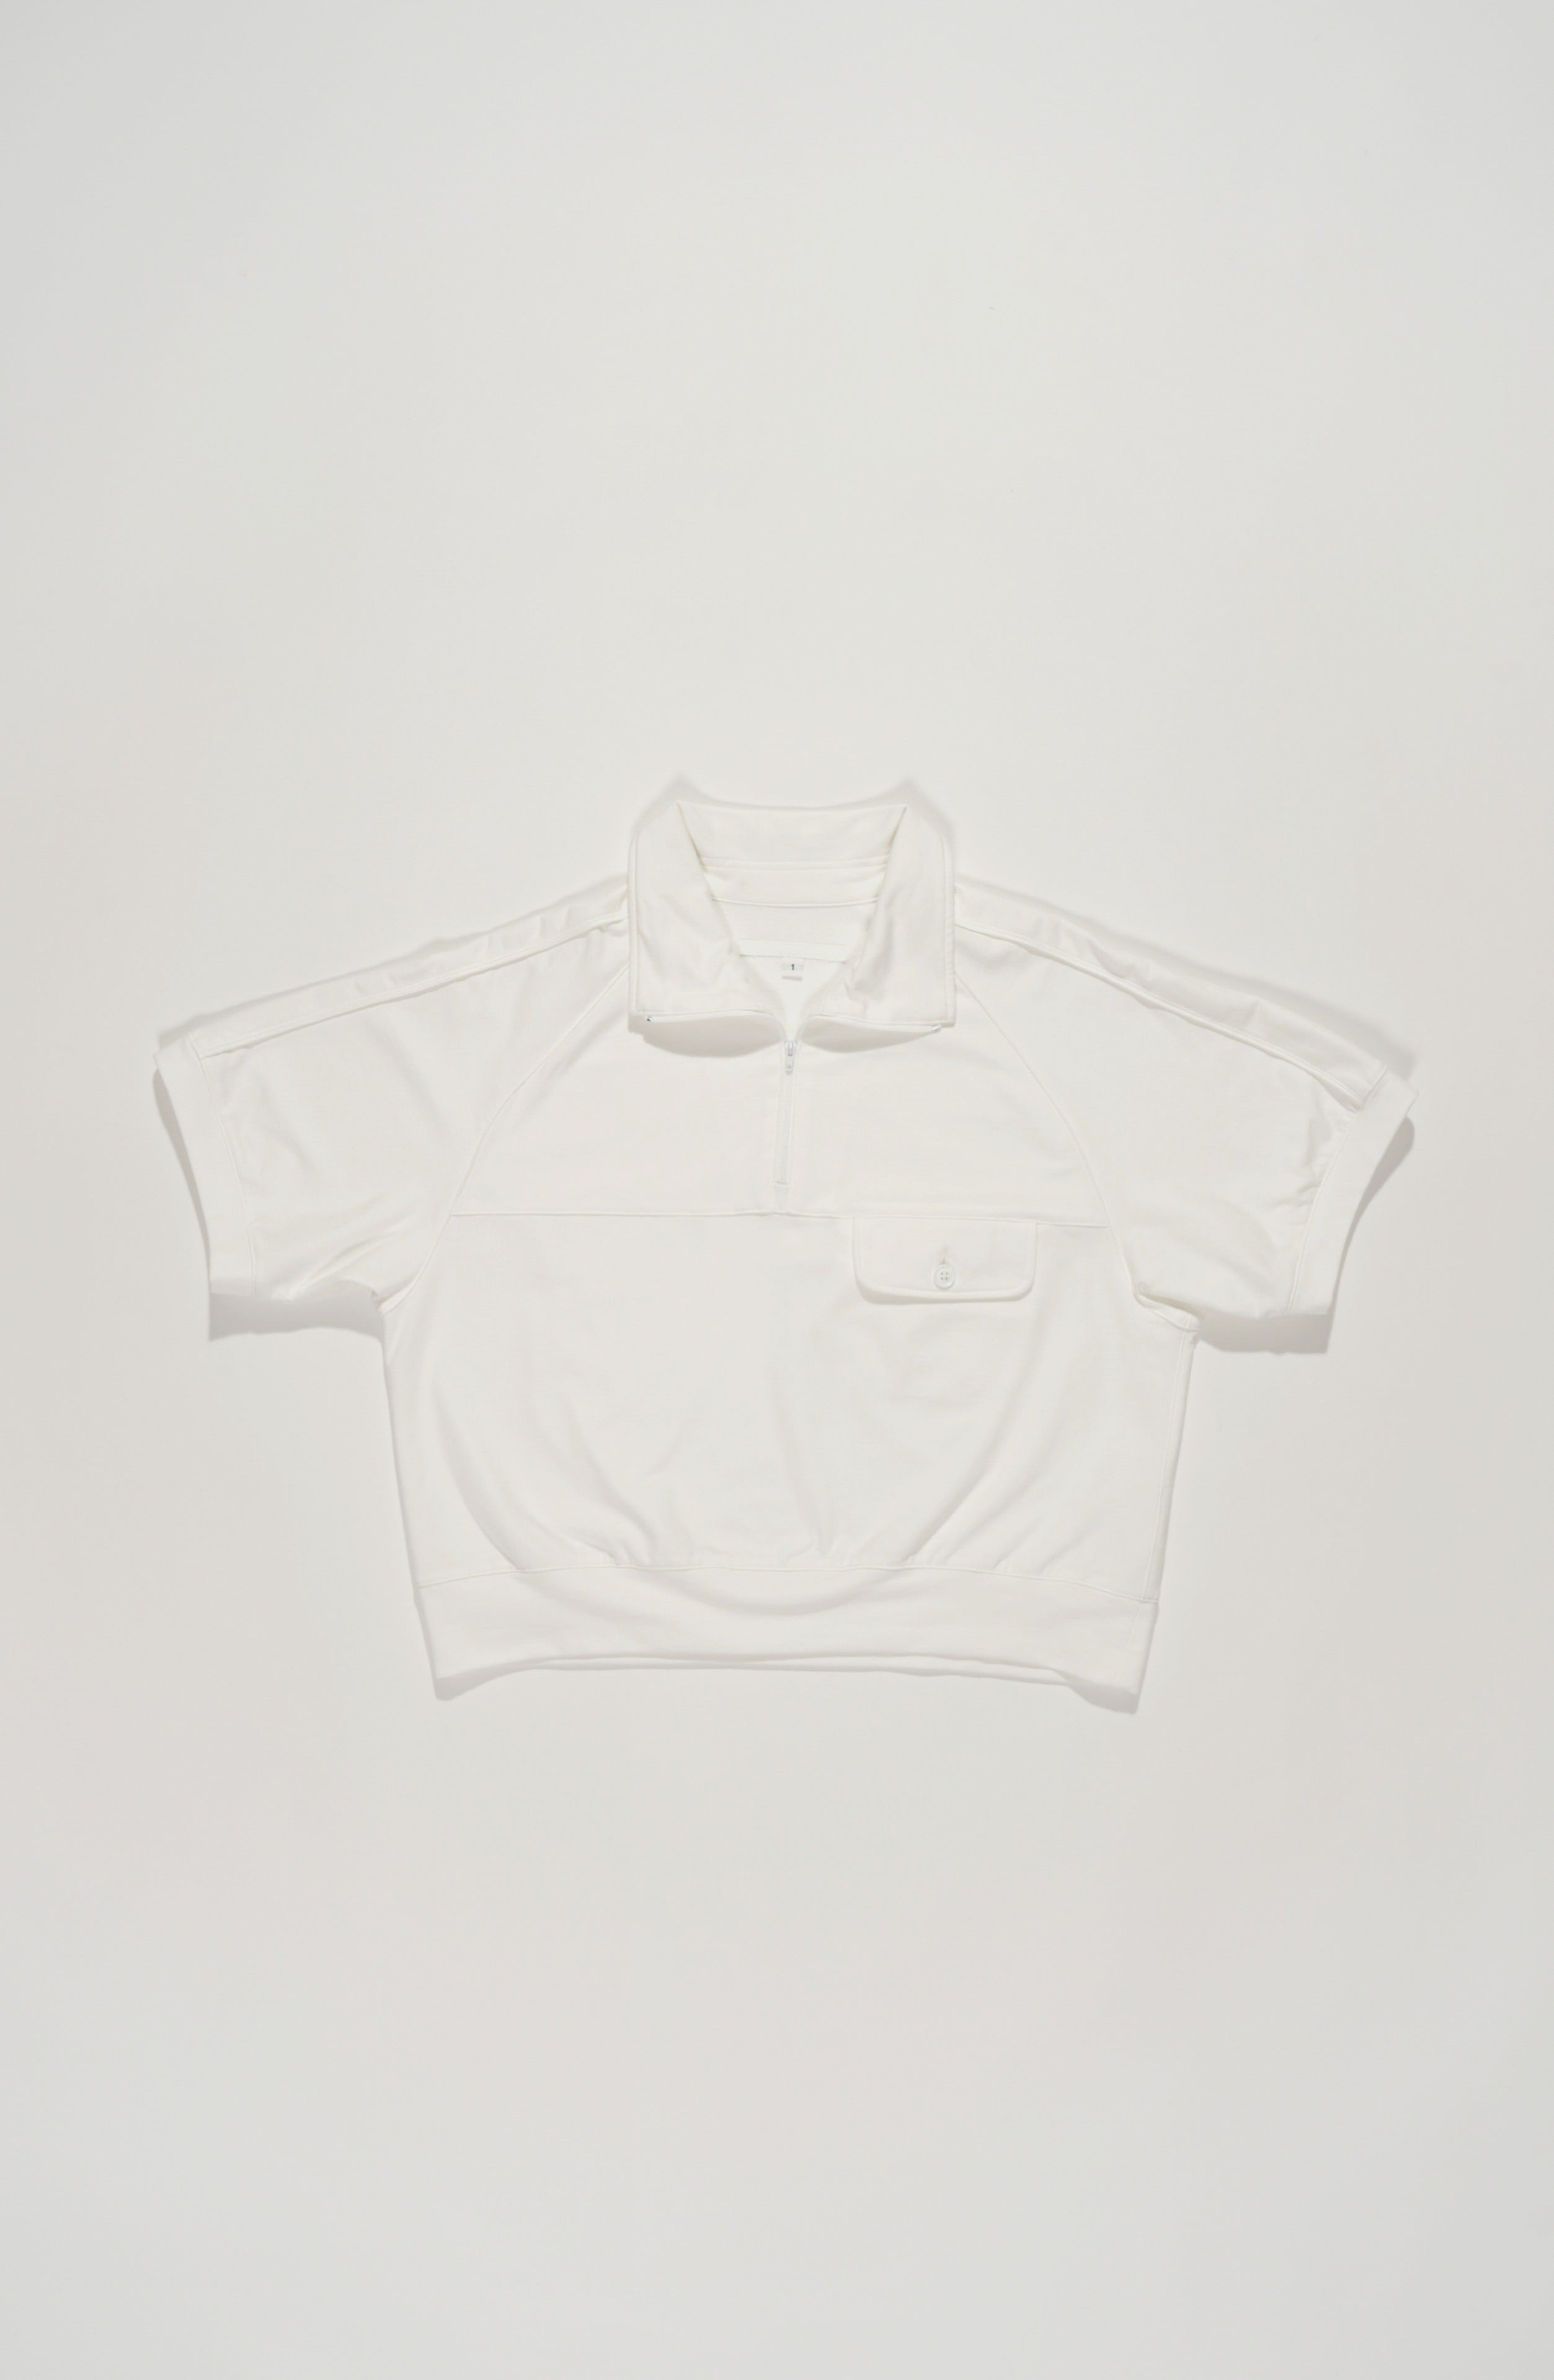 Sport Rag Knit - Off-White Solid PC Jersey